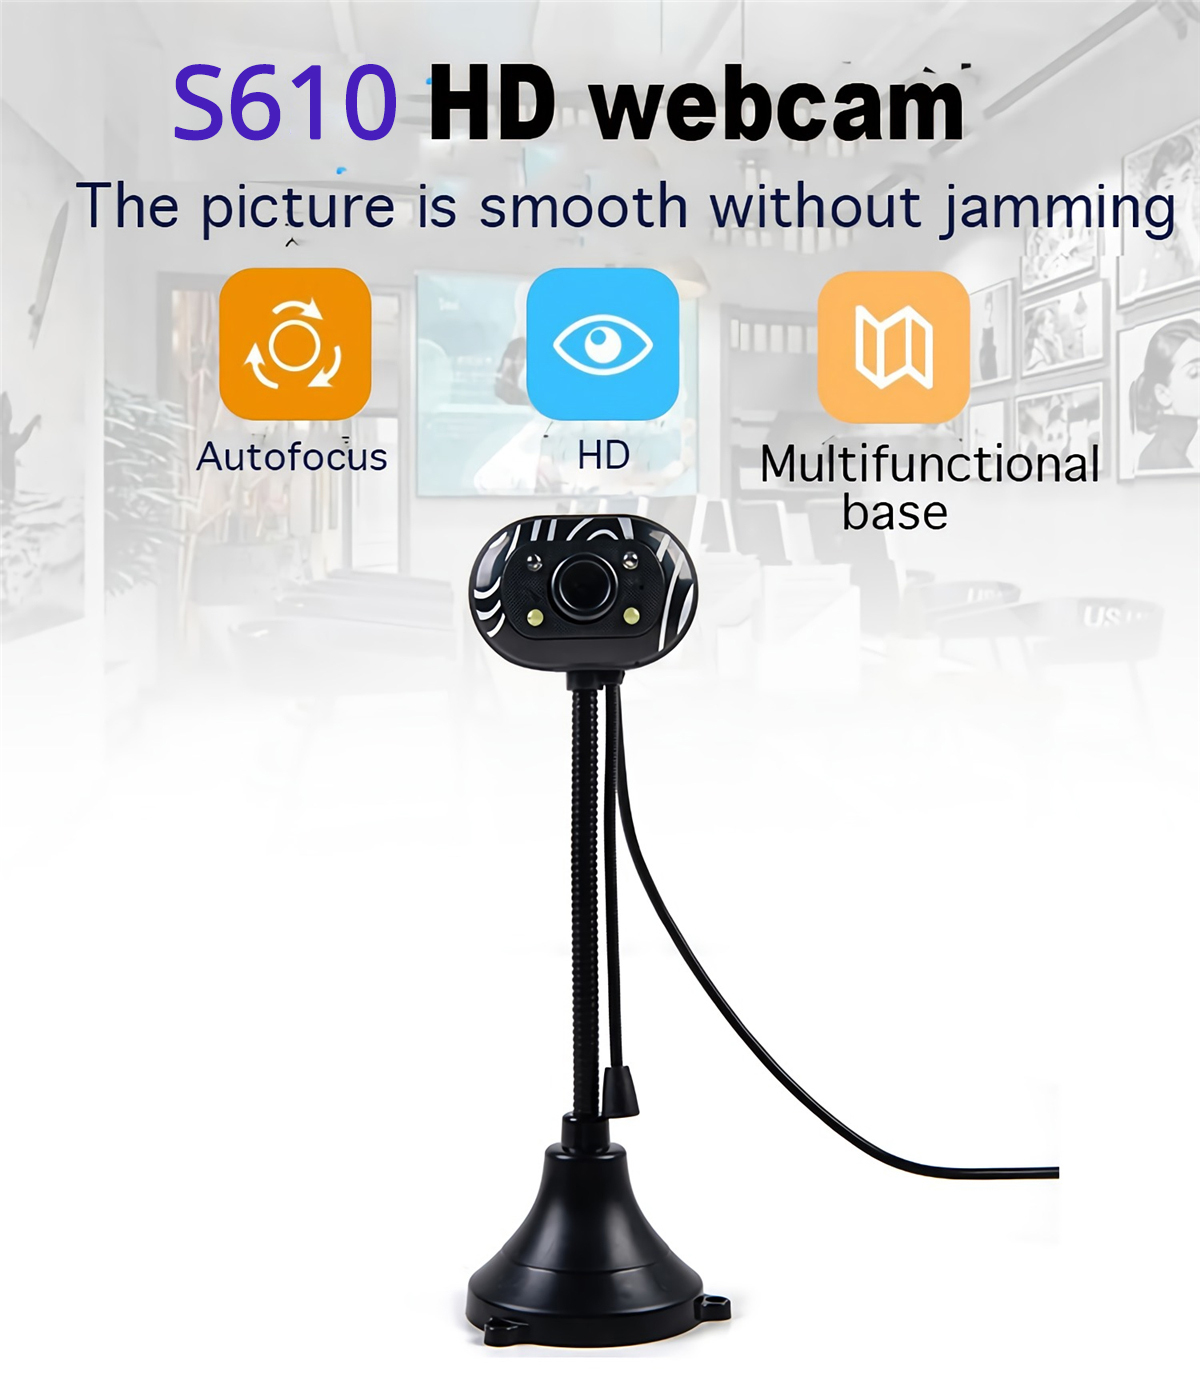 480P-HD-Webcam-CMOS-USB-20-Wired-Computer-Web-Camera-Built-in-Microphone-Camera-for-Desktop-Computer-1891956-1